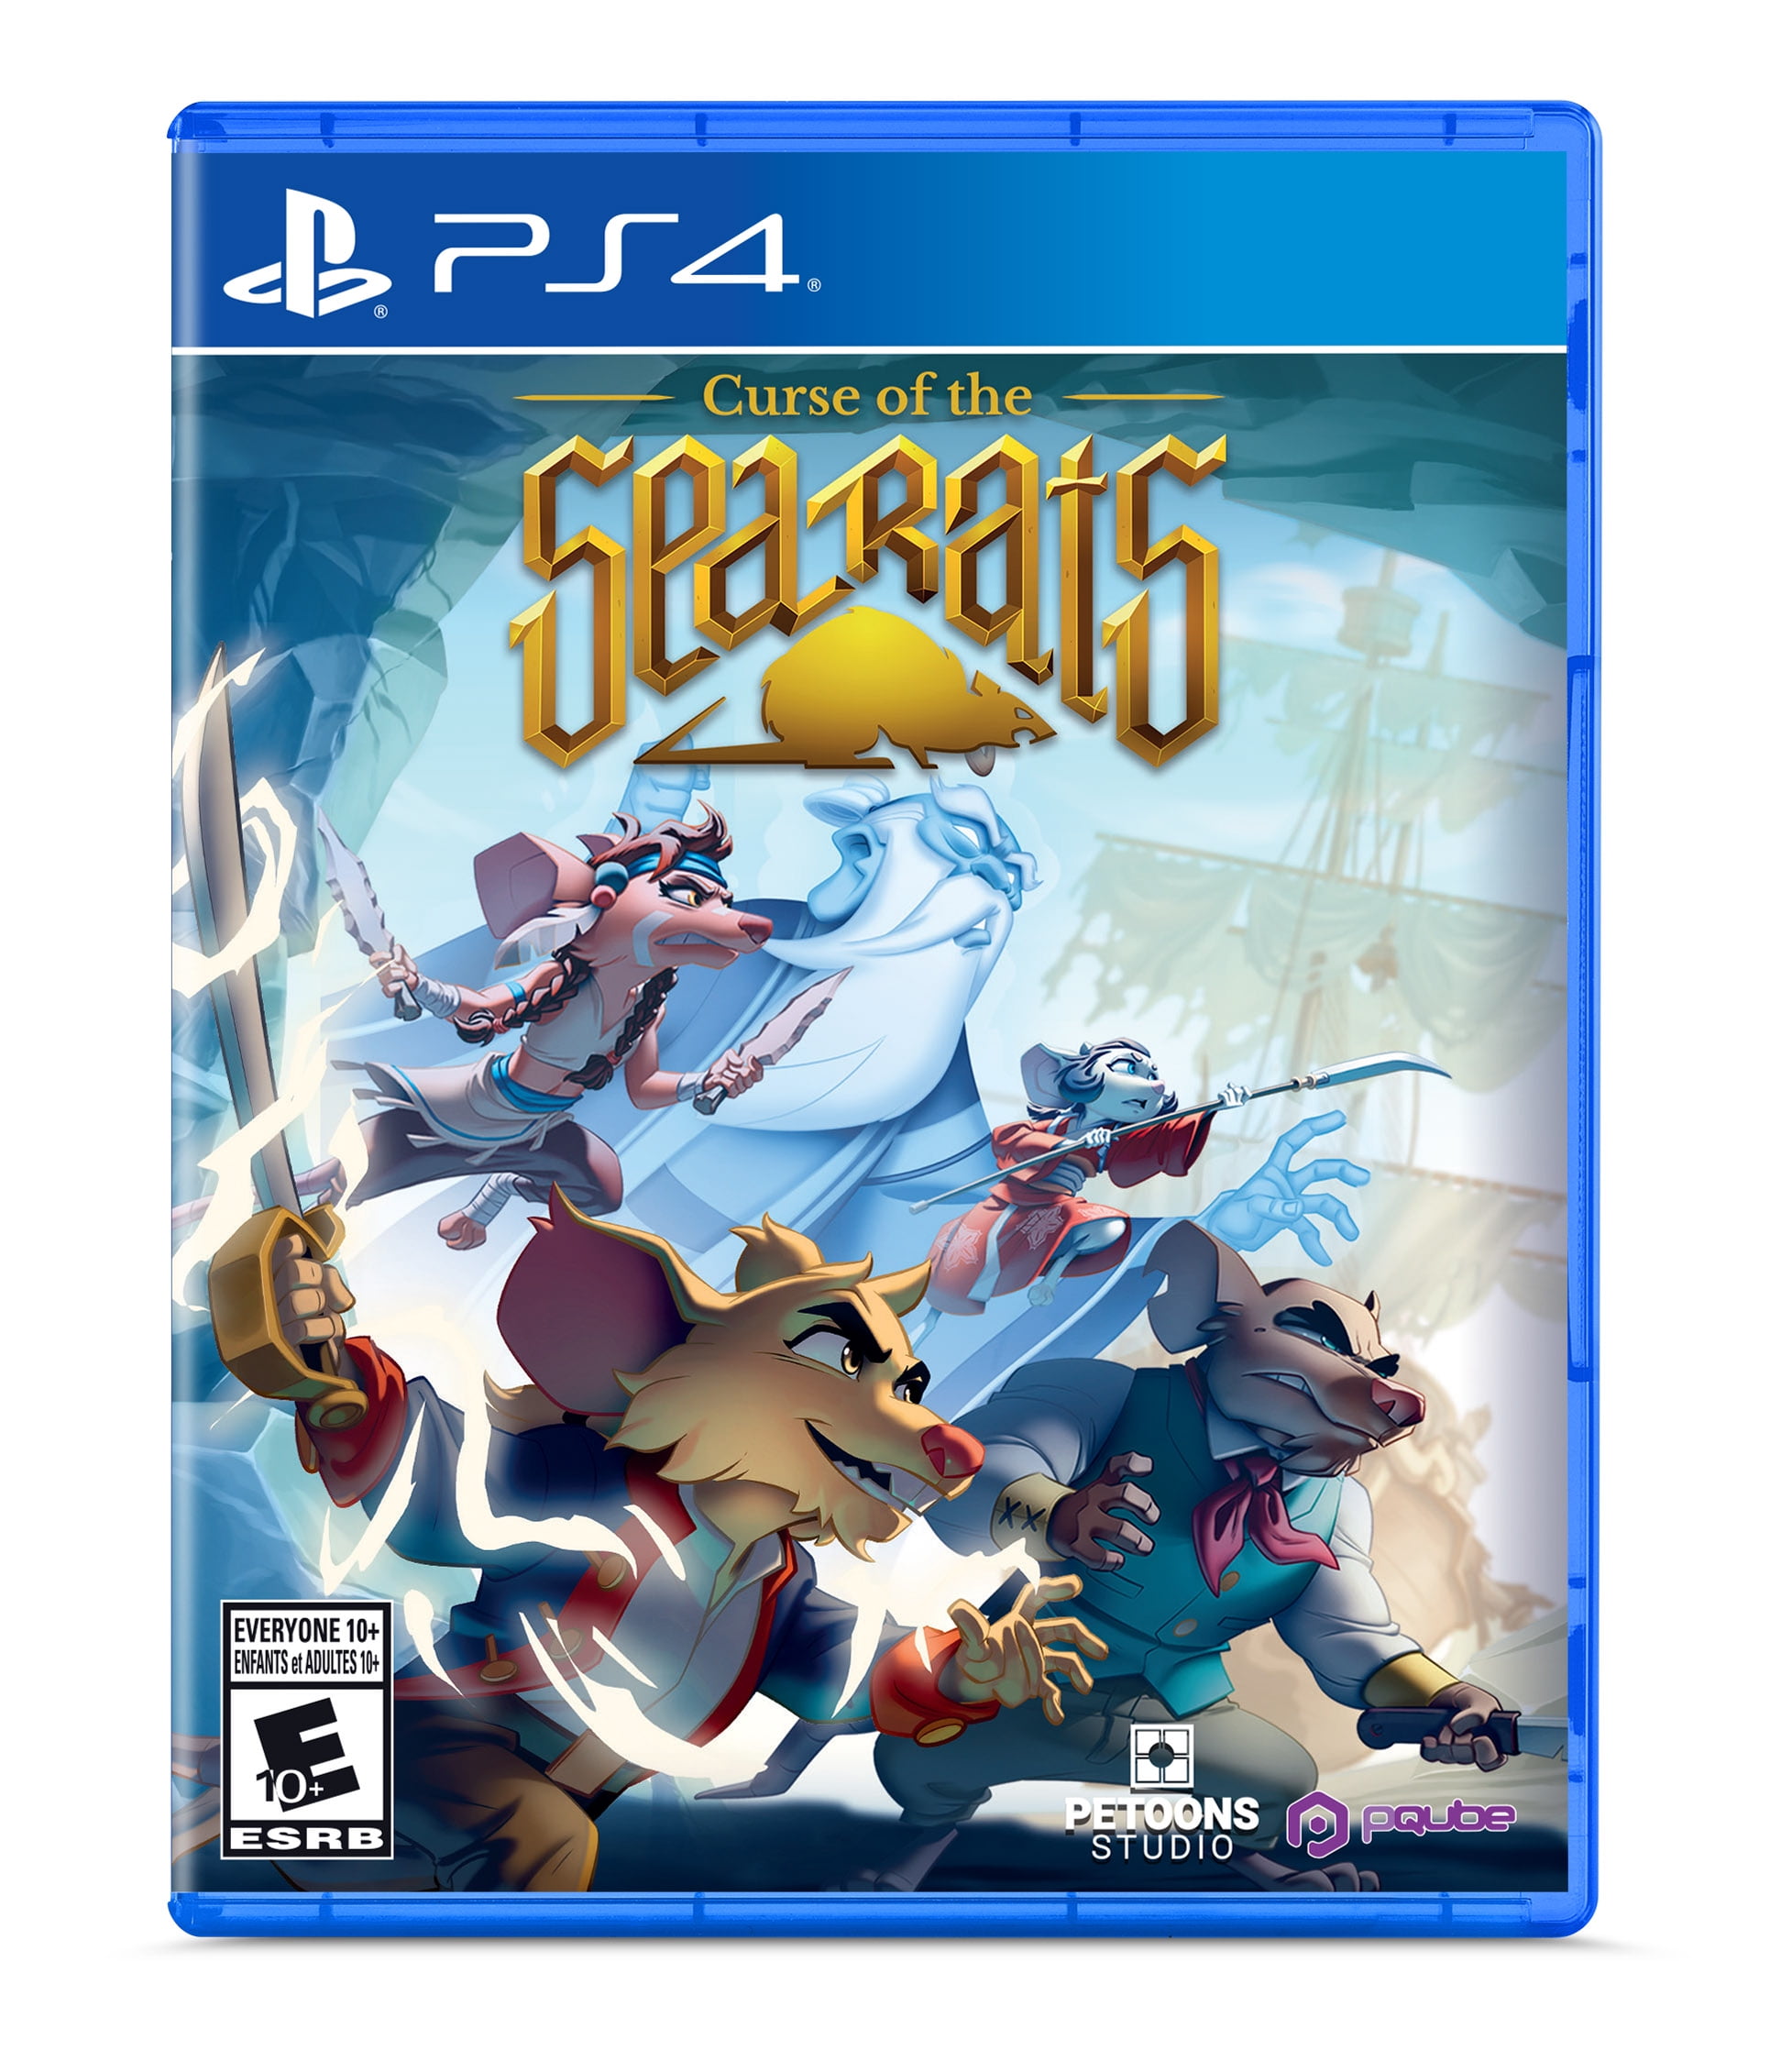 Curse the of 4, 814737021487, Edition Pqube, PlayStation Sea Rats, Physical